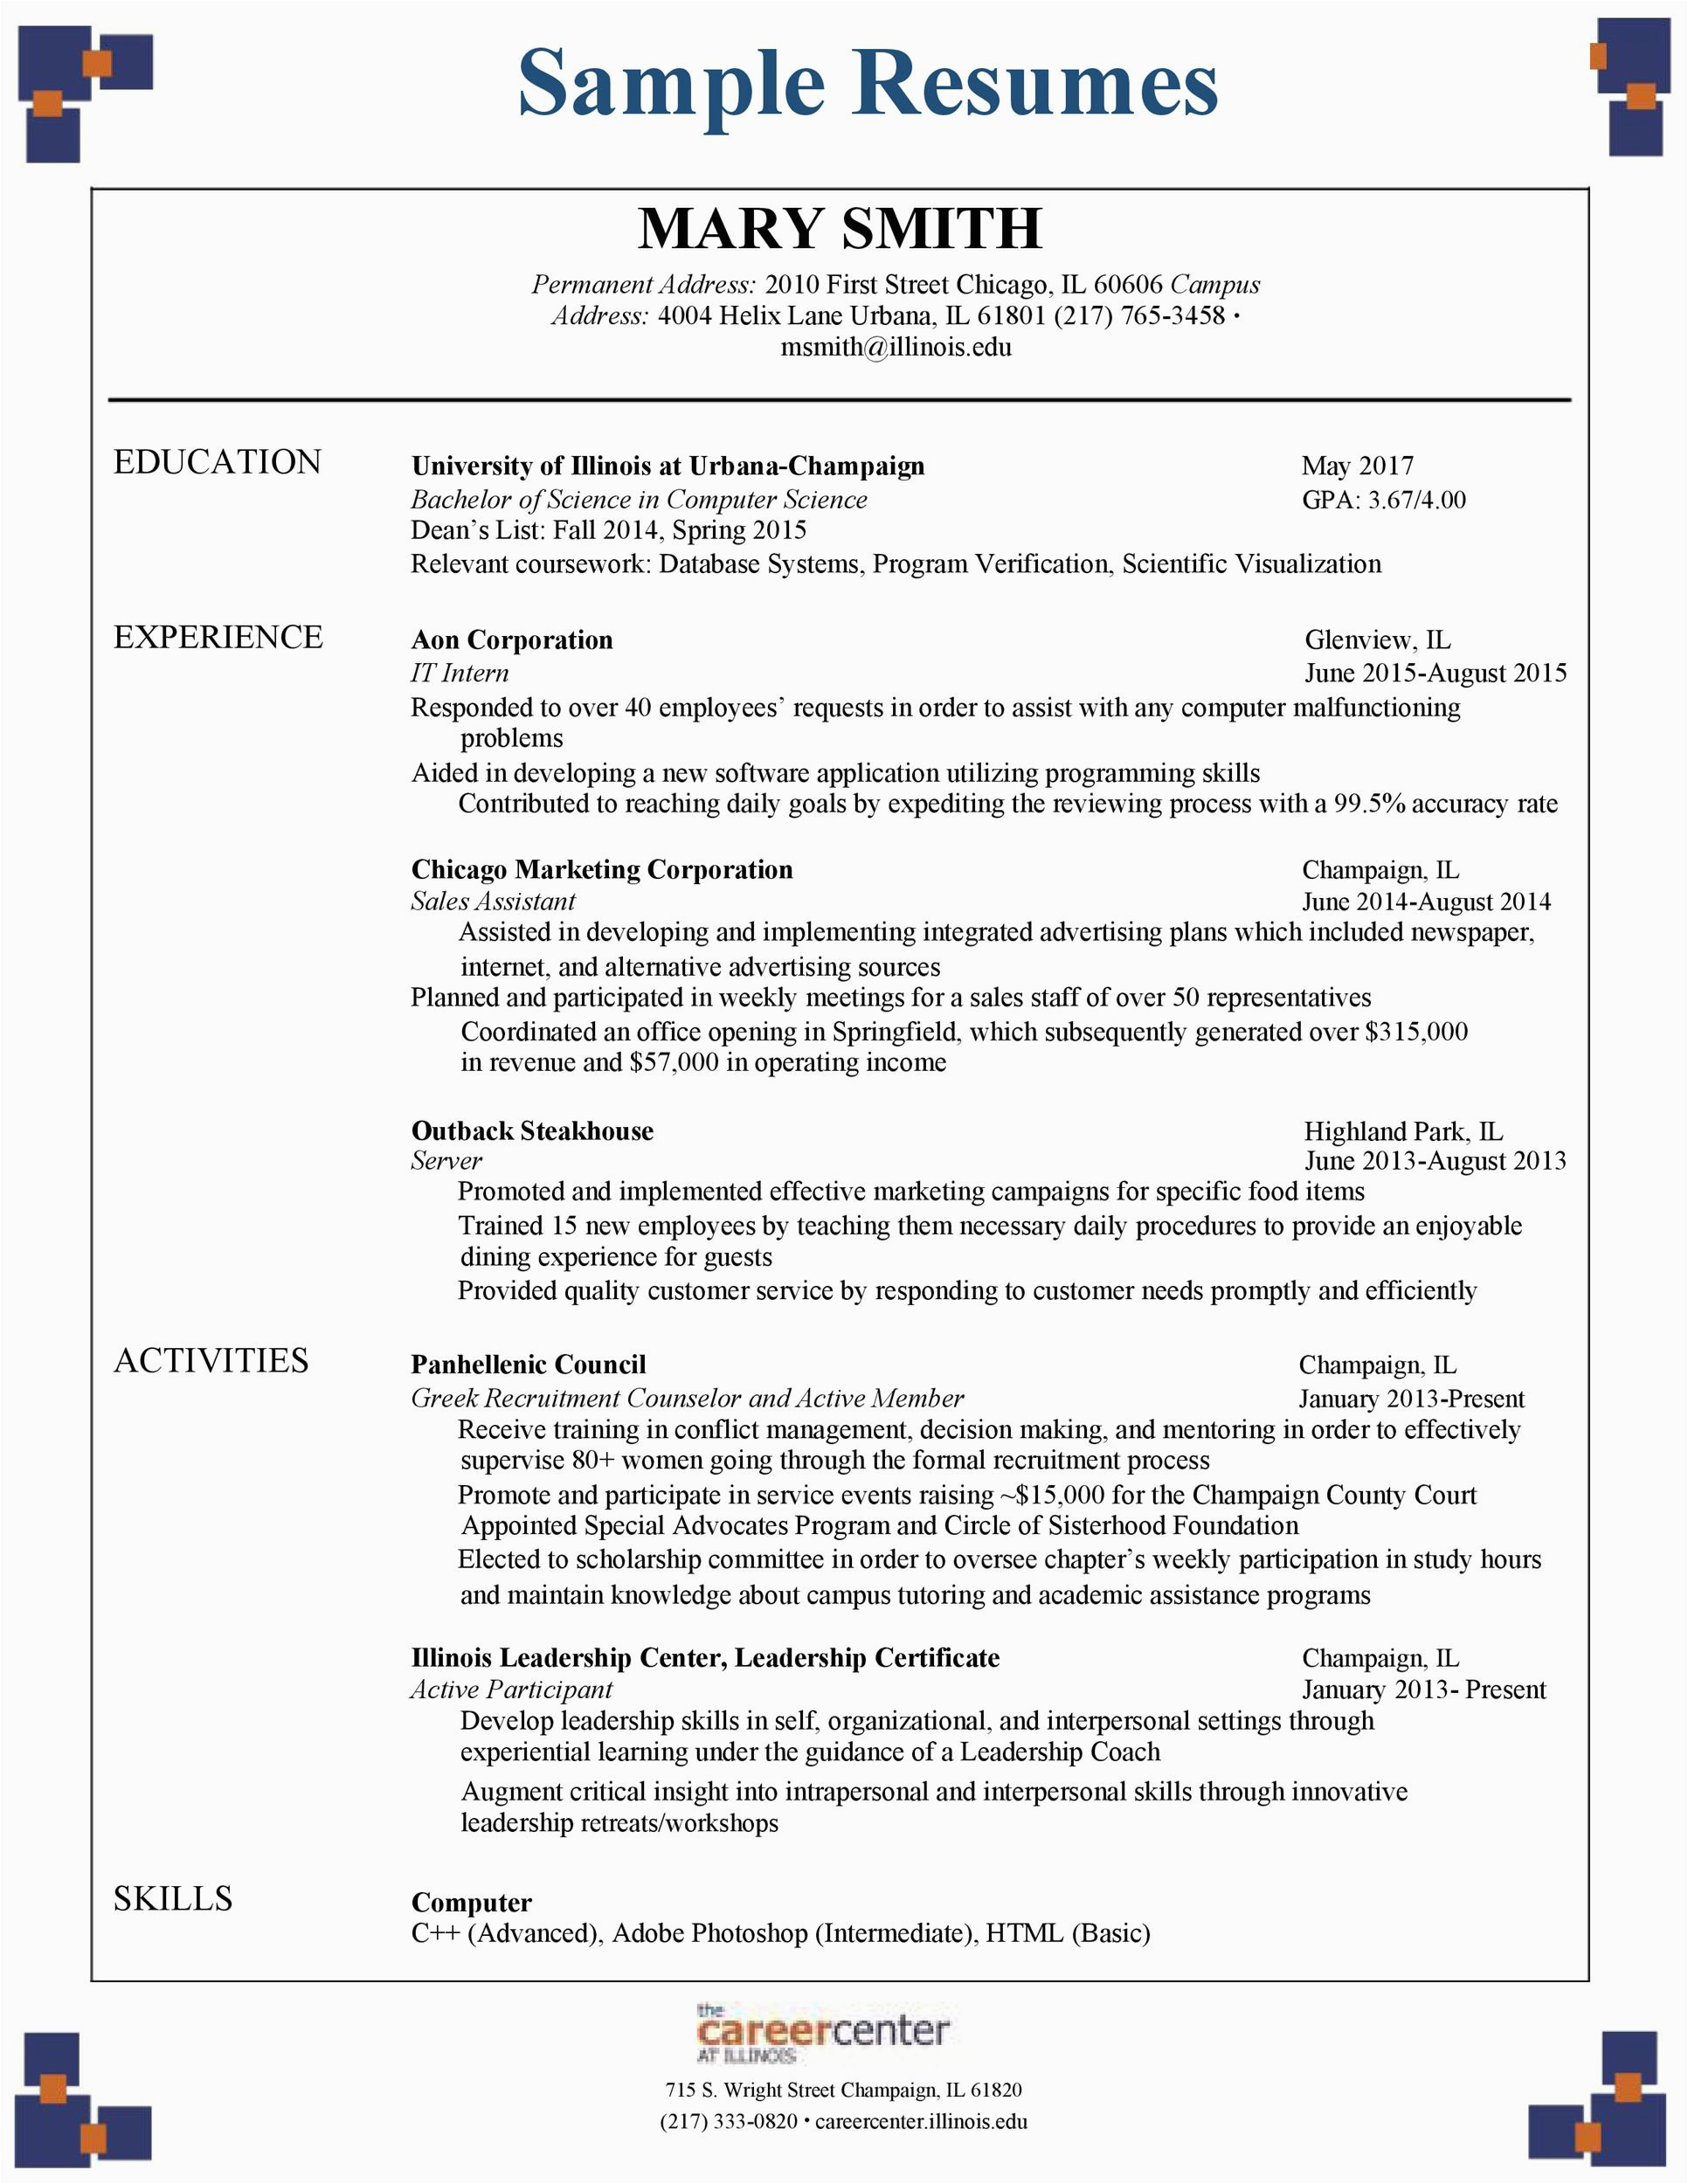 Sample Student Resume for College Application 50 College Student Resume Templates & format Templatelab